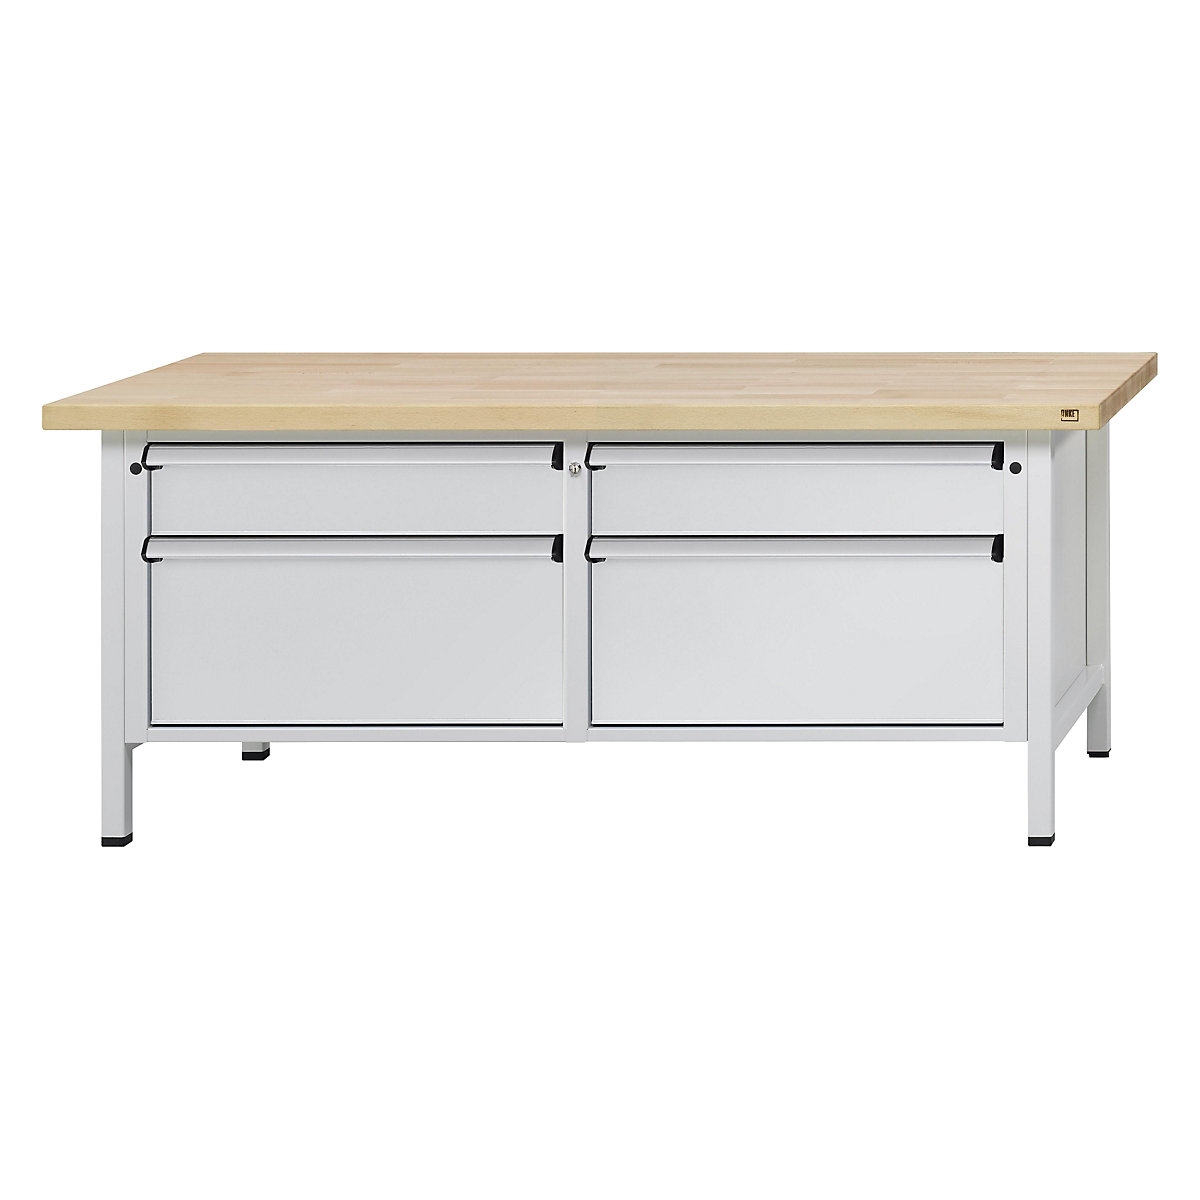 Workbench with XL/XXL drawers, frame construction – ANKE, width 2000 mm, 4 drawers, solid beech worktop, front in light grey-12